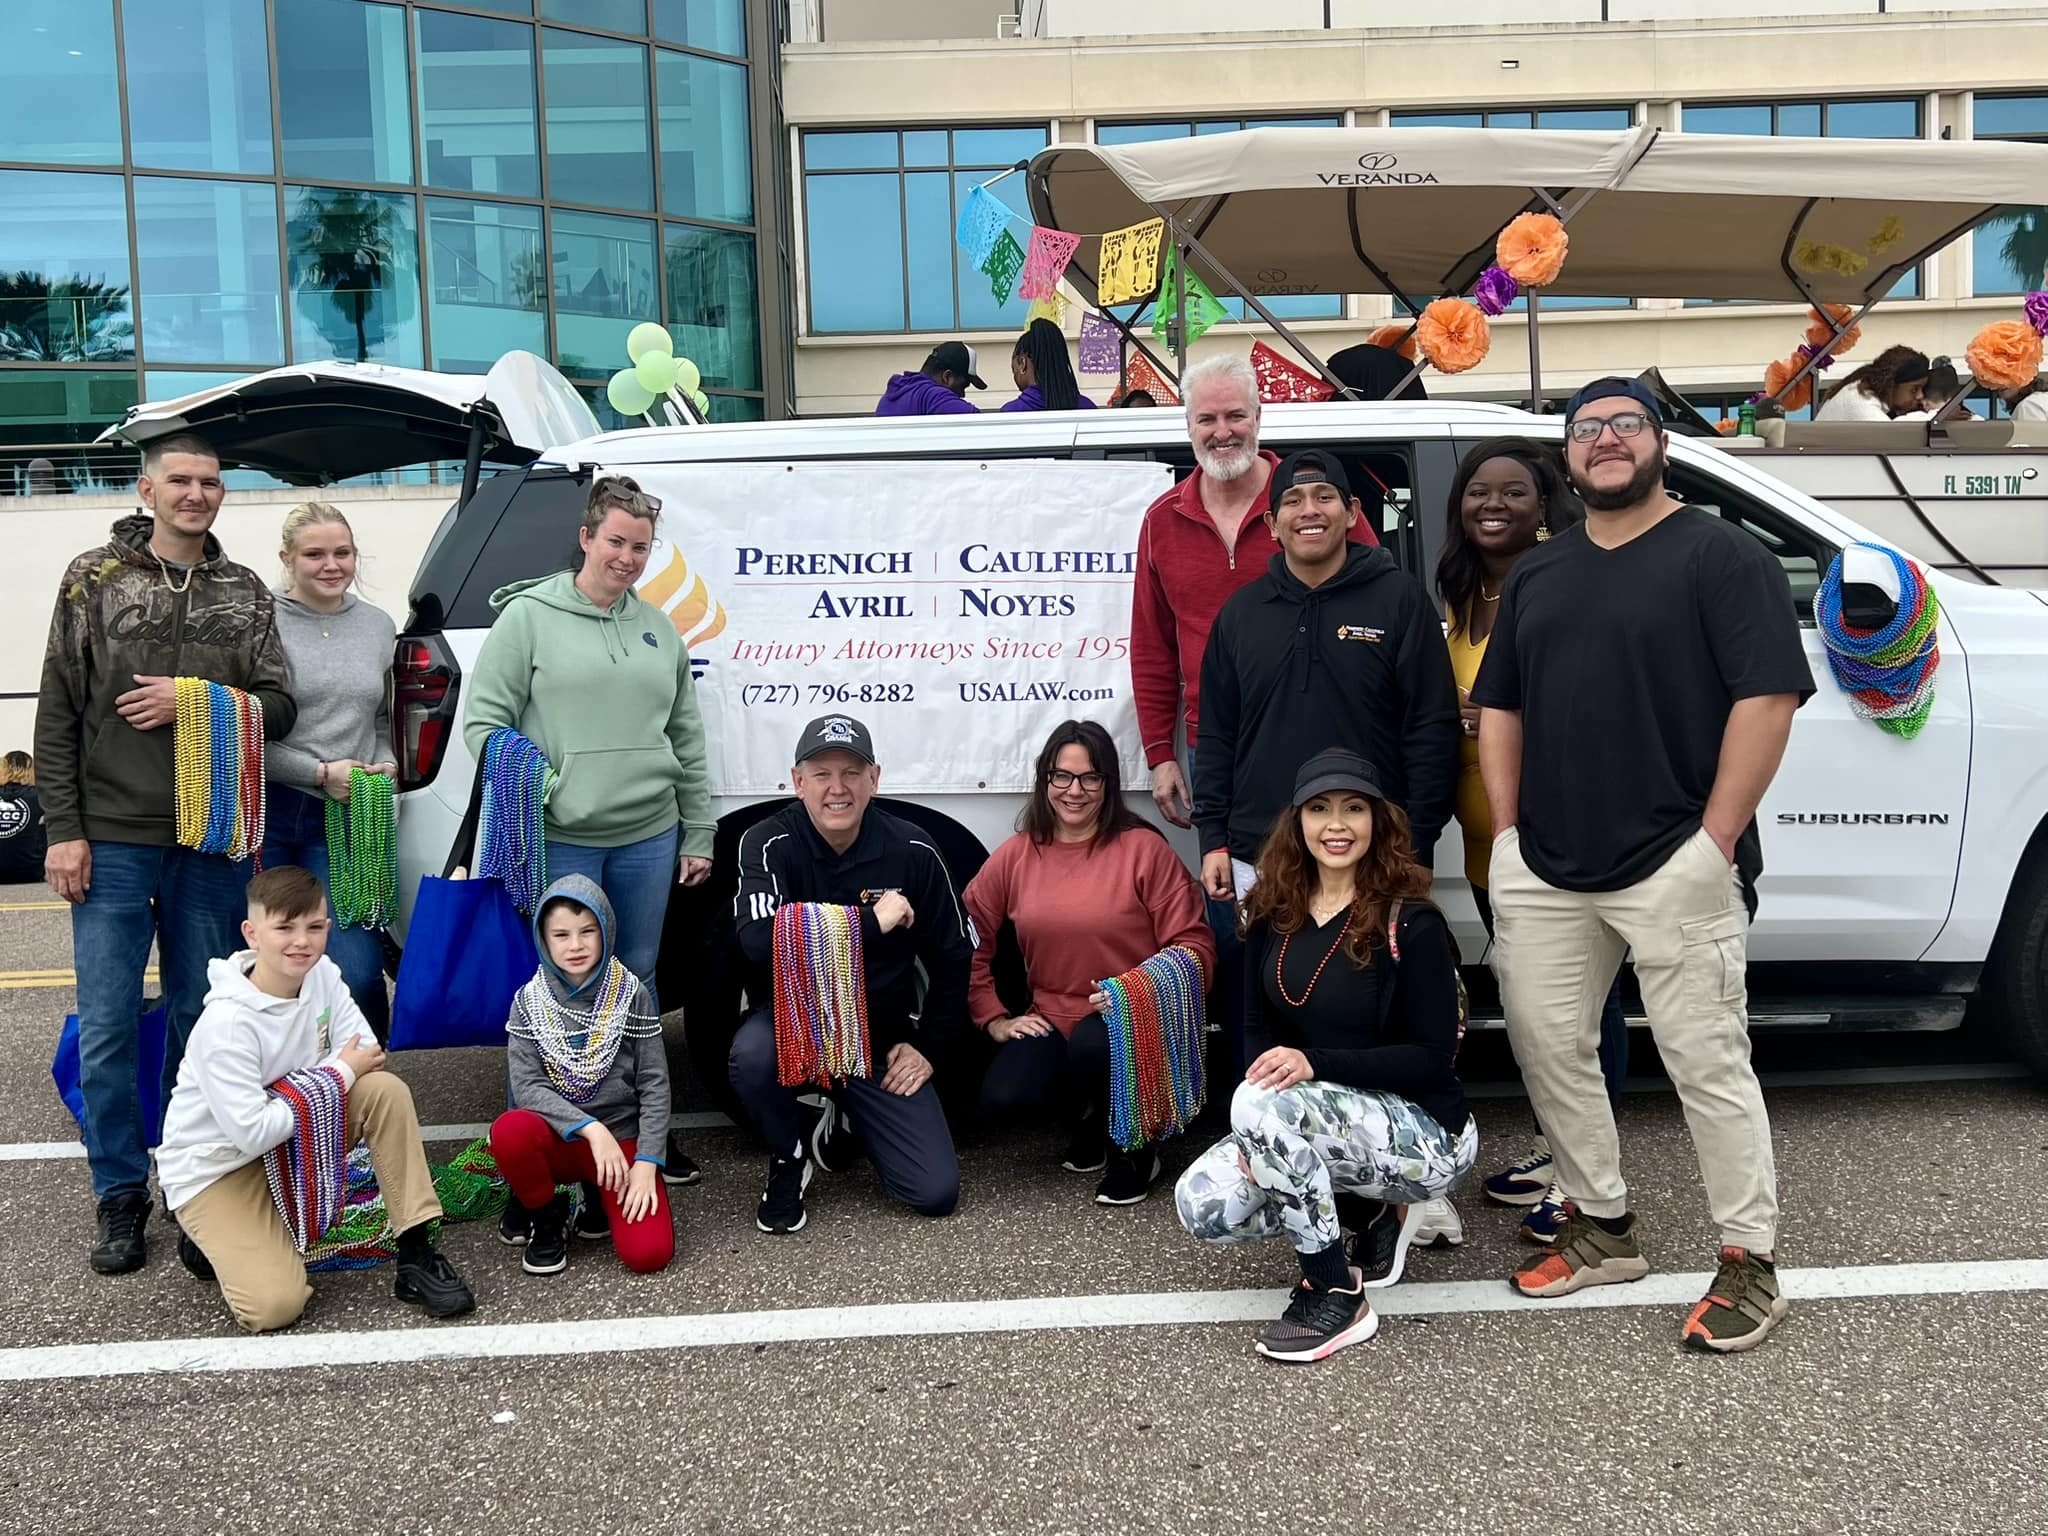 Perenich, Caulfield, Avril & Noyes Participates in the 38th Annual Martin Luther King Jr. Parade in Downtown St. Petersburg